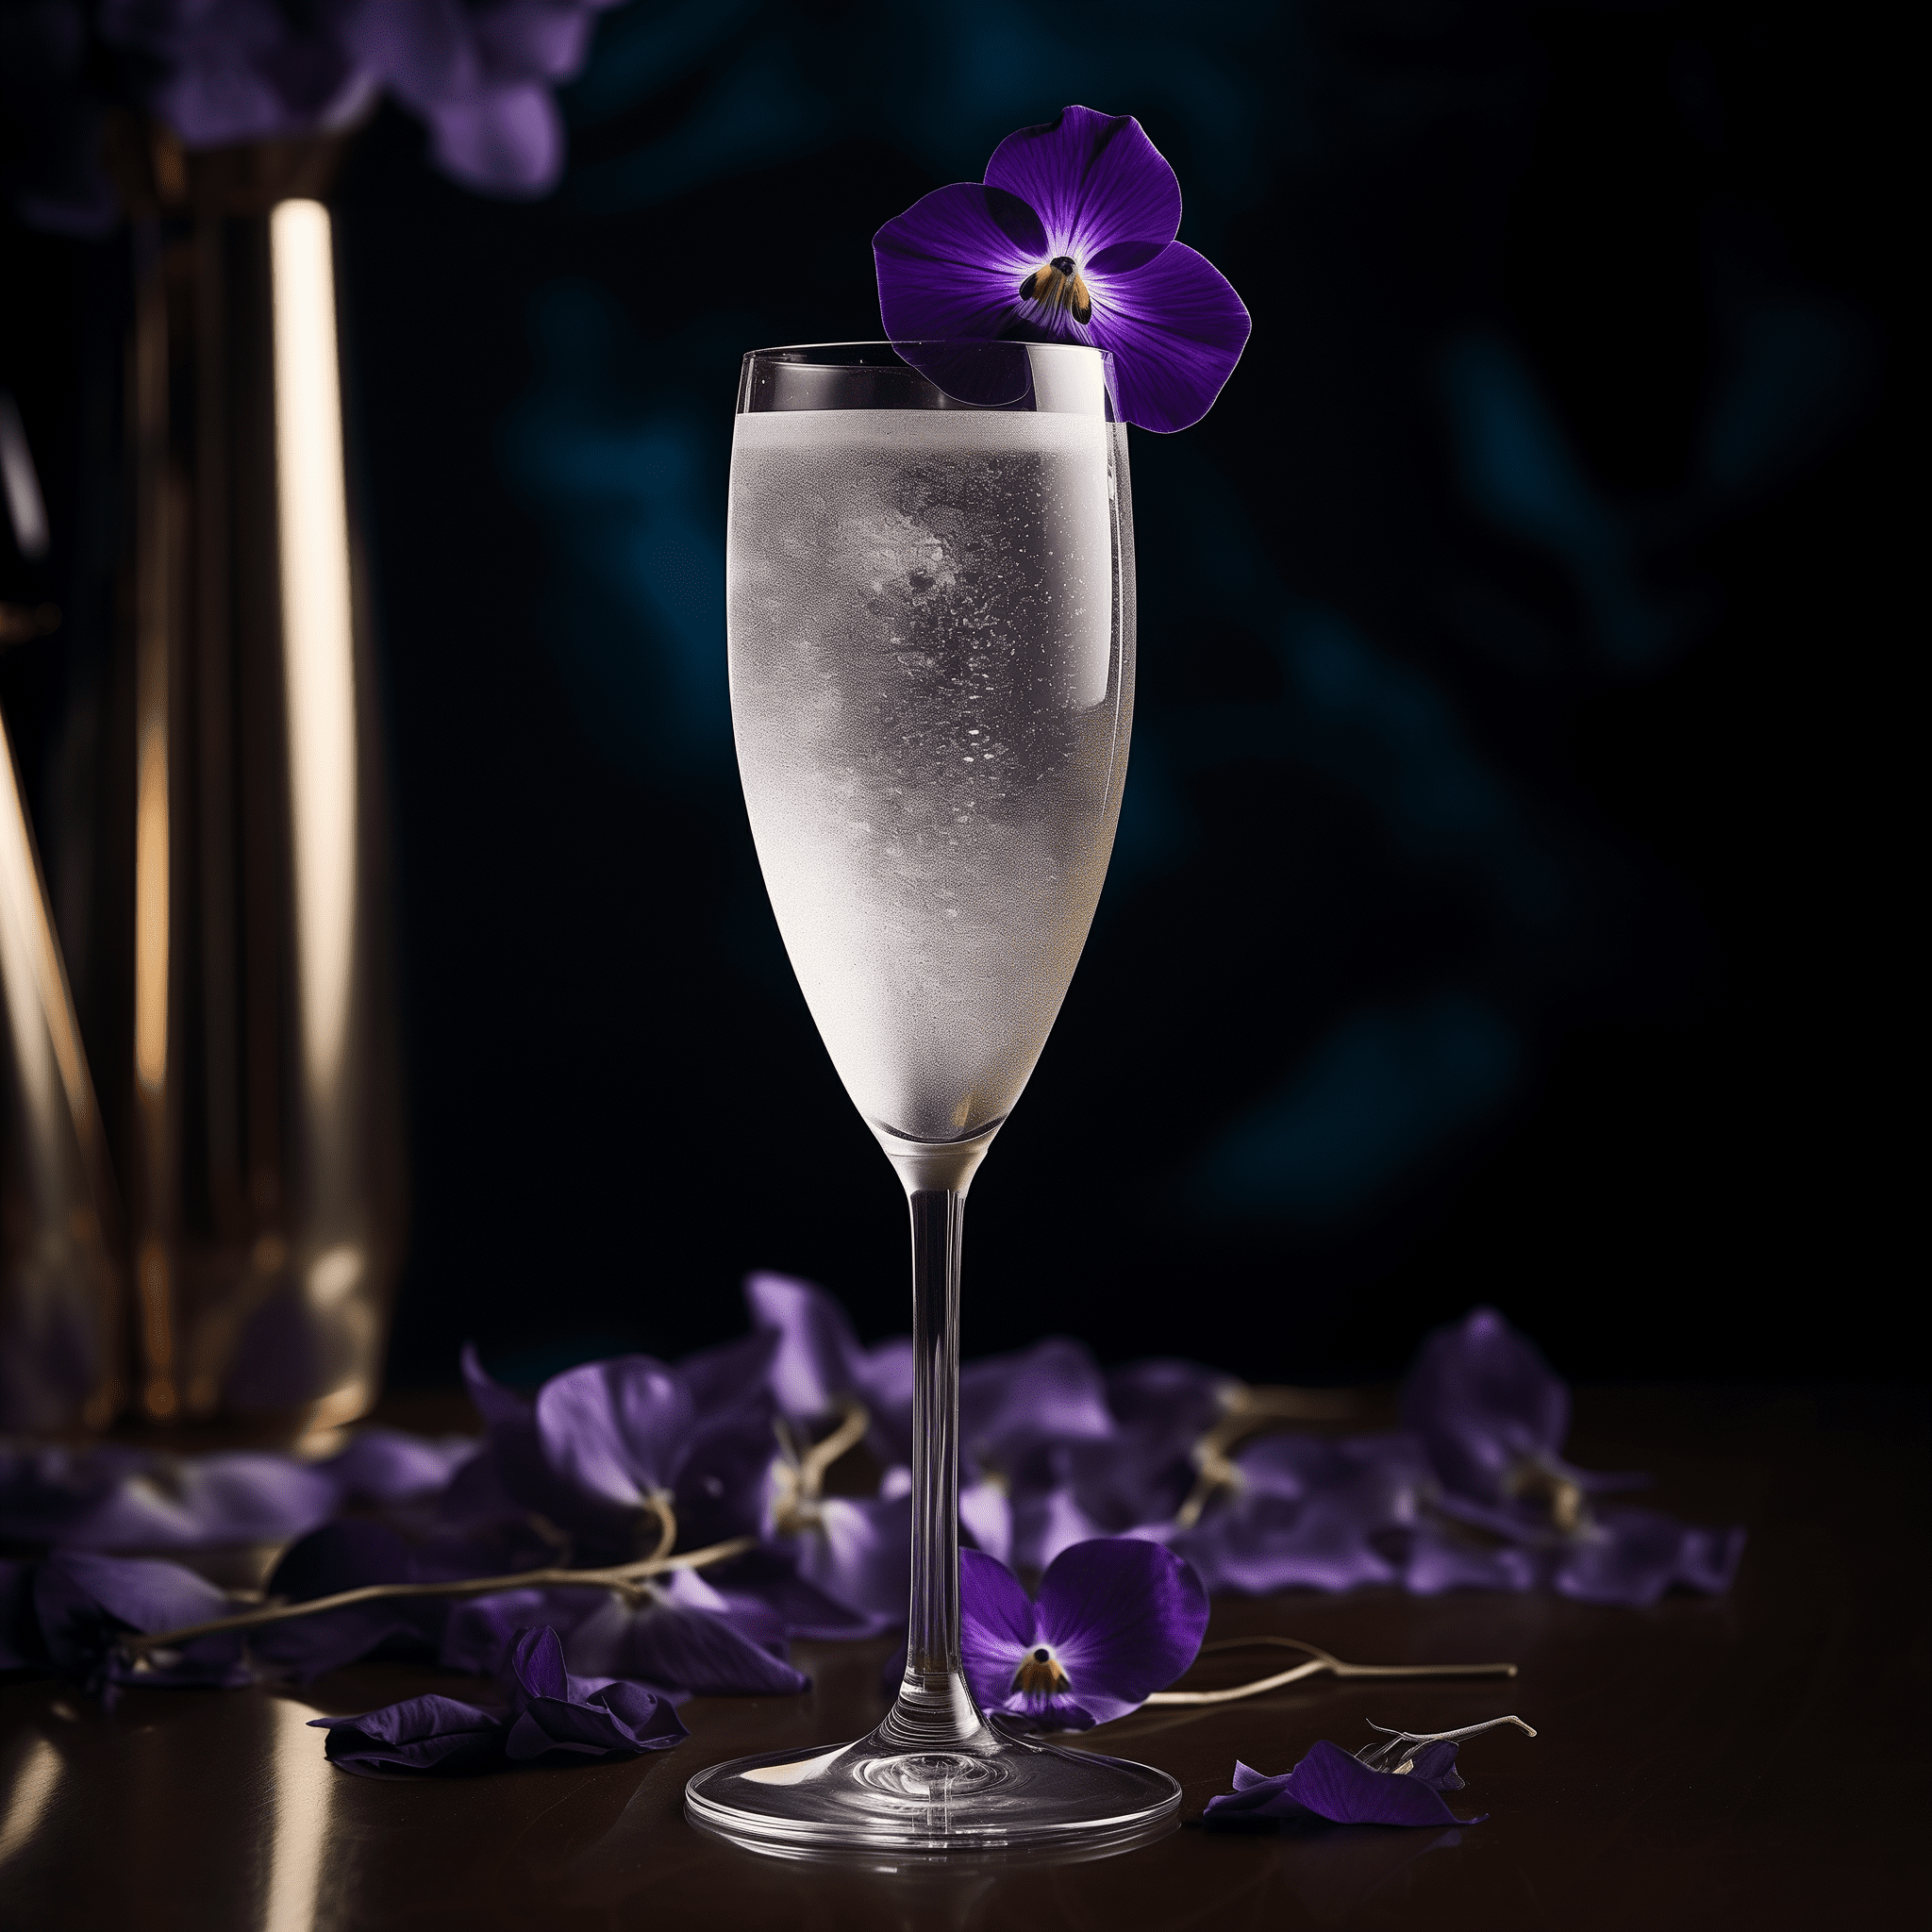 Grey Ghost Cocktail Recipe - The Grey Ghost is a delicately sweet cocktail with a floral bouquet that gently unfolds on the palate. The effervescence of the Brut Champagne adds a refreshing crispness, balancing the soft violet and elderflower notes.